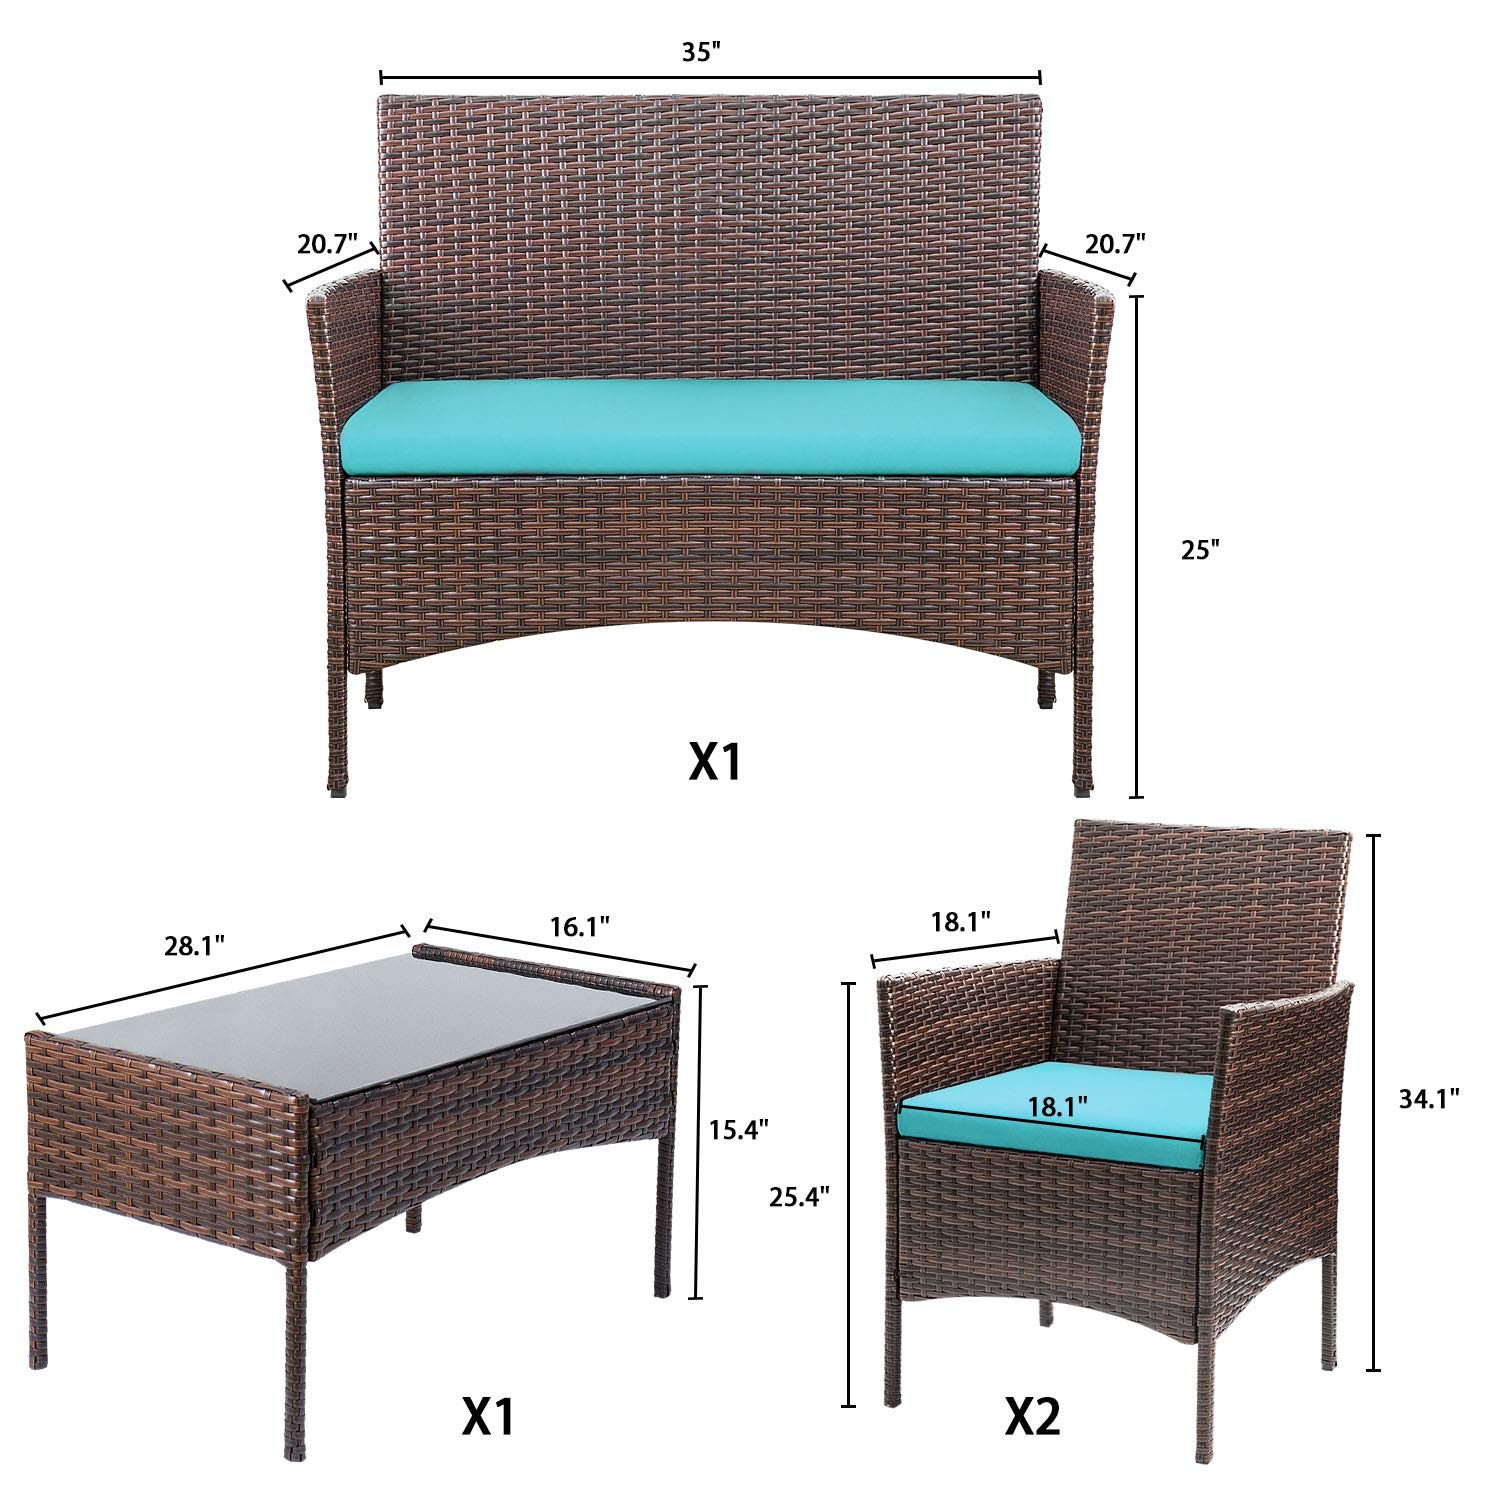 Lacoo 4 Pieces Outdoor Patio Furniture Brown PE Rattan Wicker Table and Chairs Set Bar Balcony Backyard Garden Porch Sets with Cushioned Tempered Glass, Blue Cushion - image 3 of 4